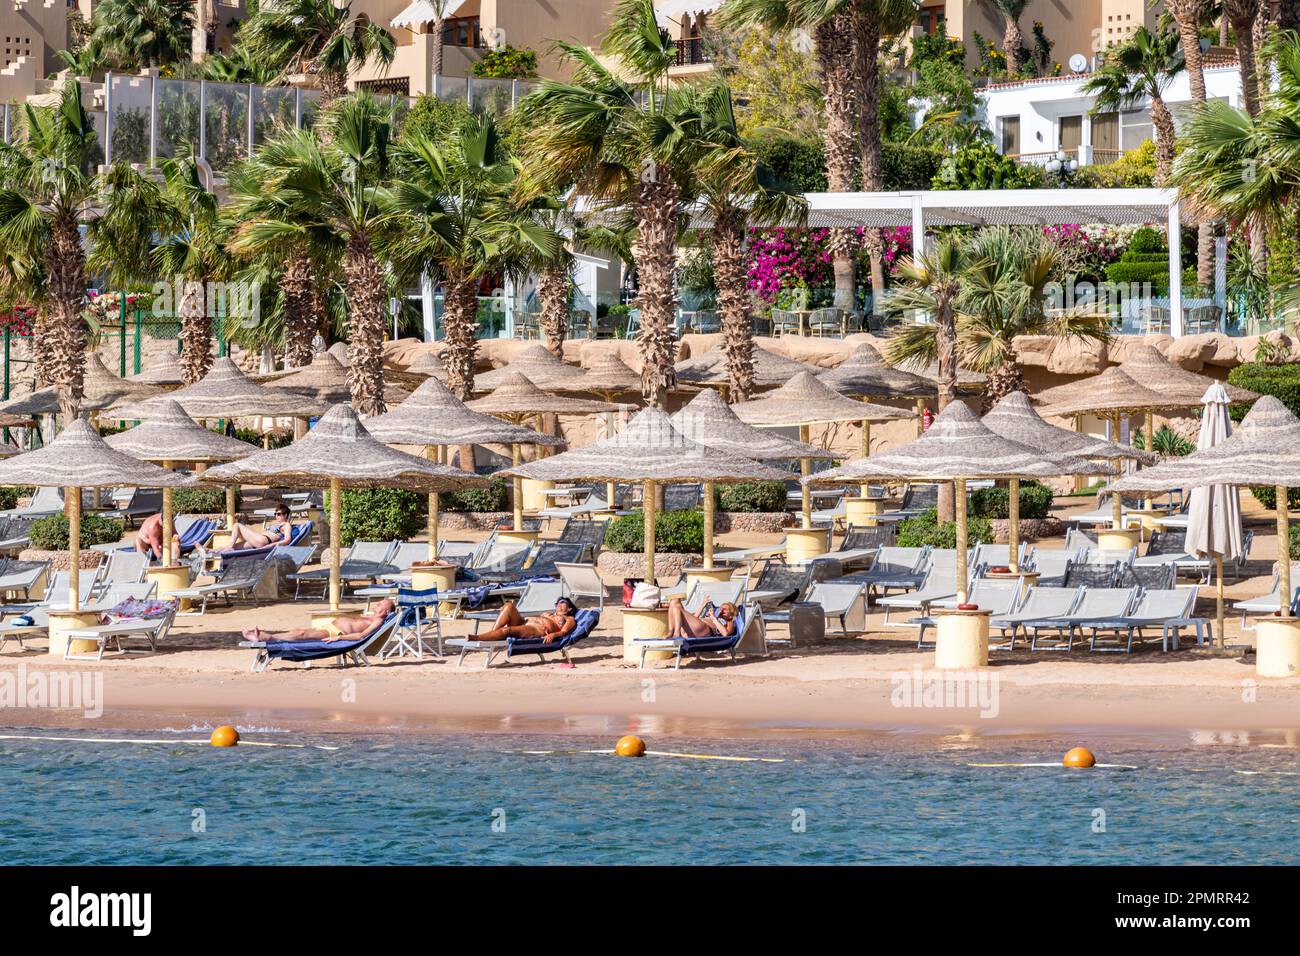 A view of the deckchairs on the beach of the Royal Savoy luxury hotel in Sharm el-Sheikh, Egypt Stock Photo